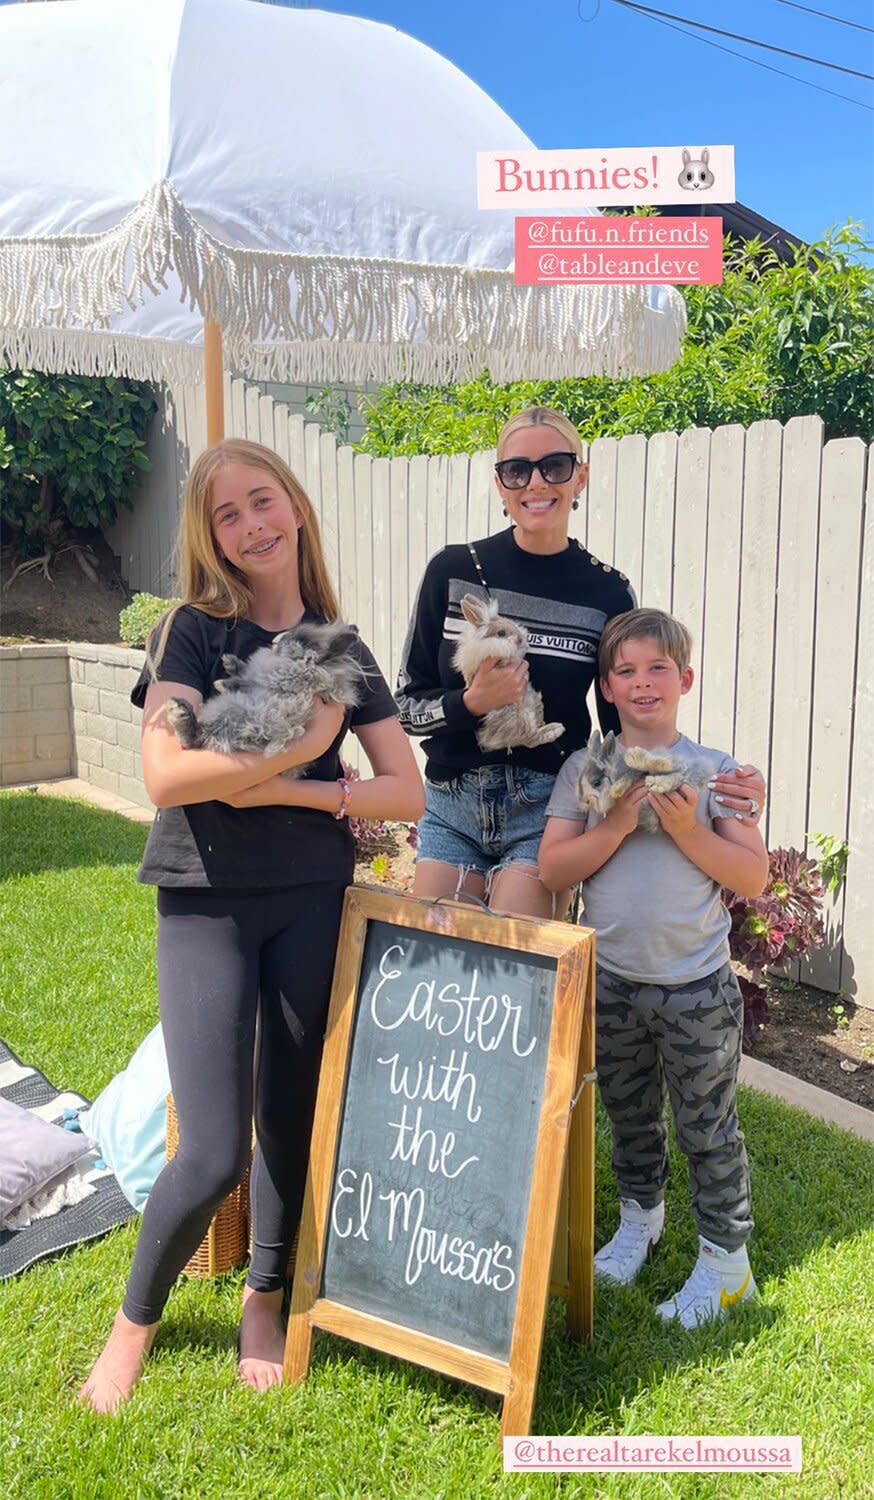 Heather Rae El Moussa and Tarek El Moussa Celebrate Easter with Real Bunnies